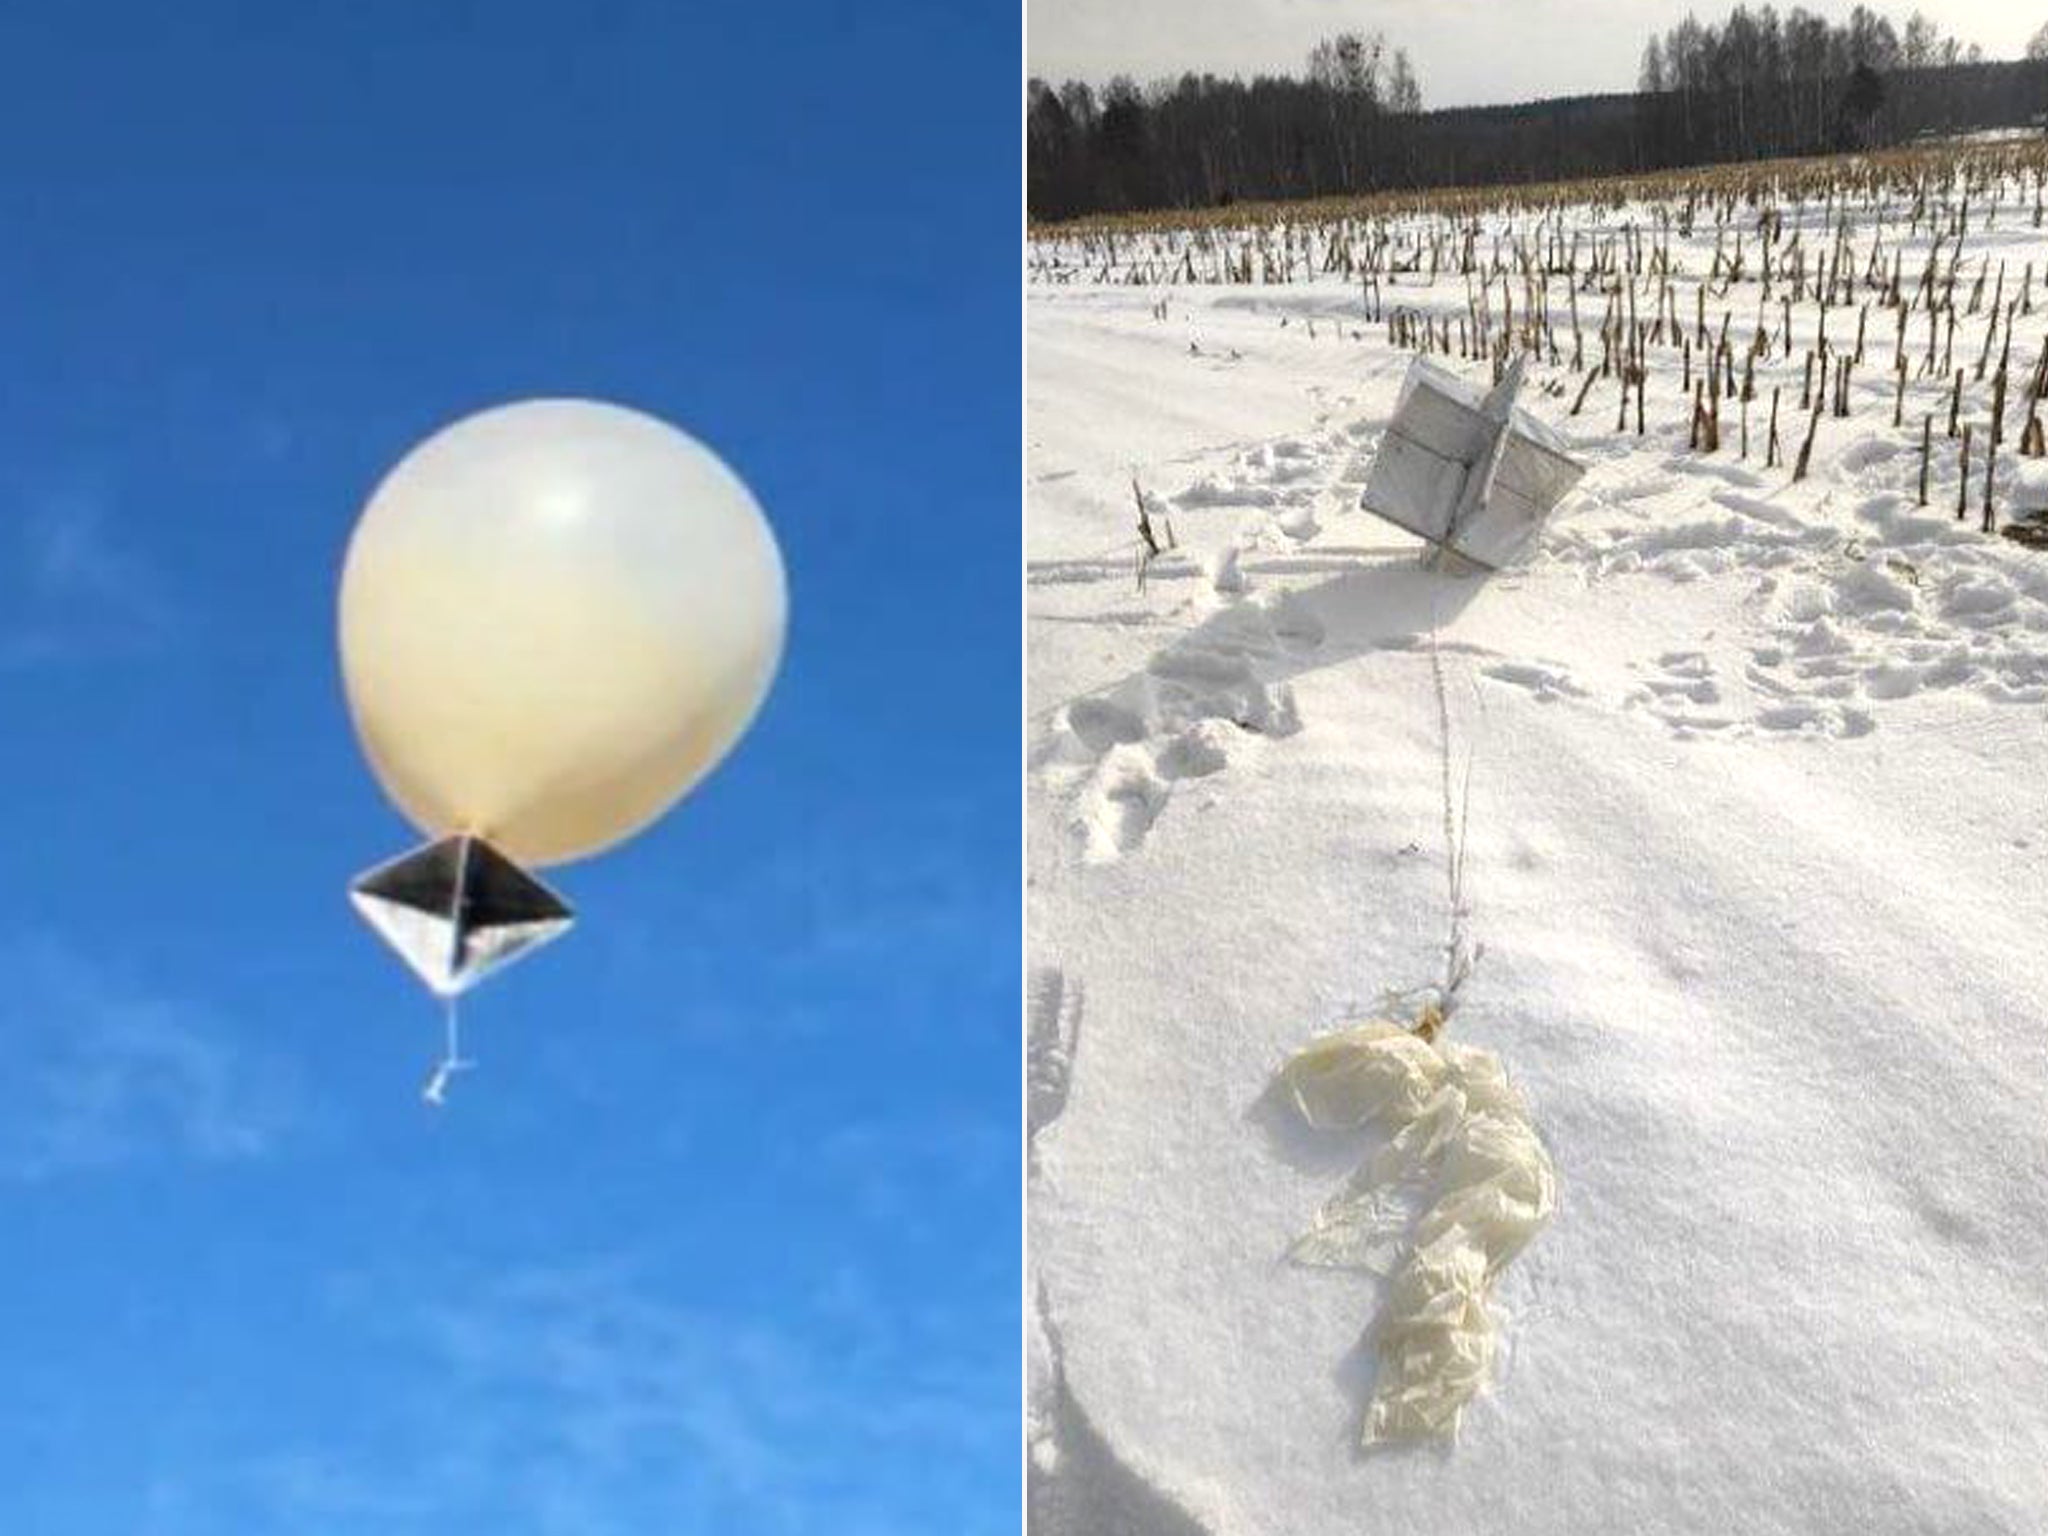 Some of the balloons shot down over Ukraine